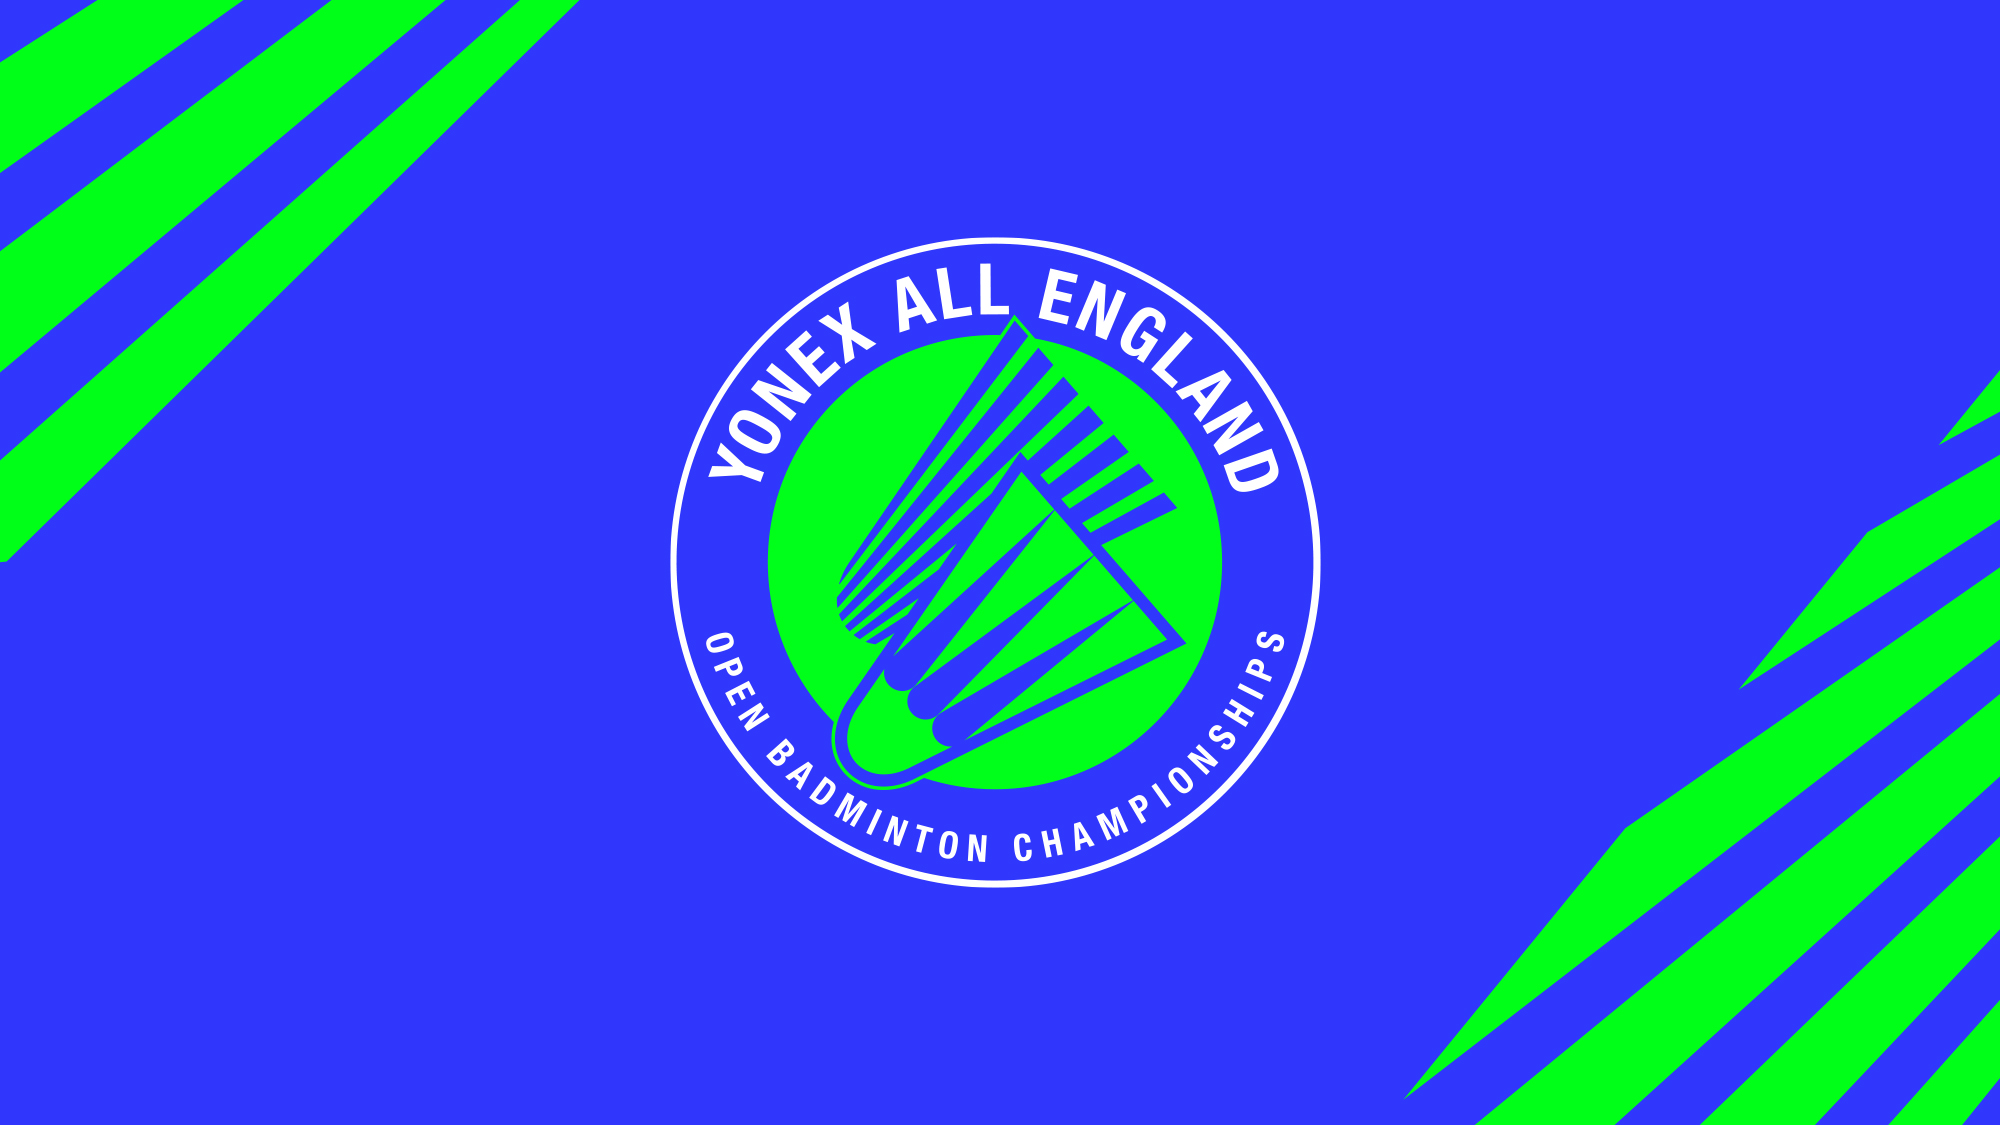 Energetic identity refresh for the YONEX All England Open Badminton Championships 